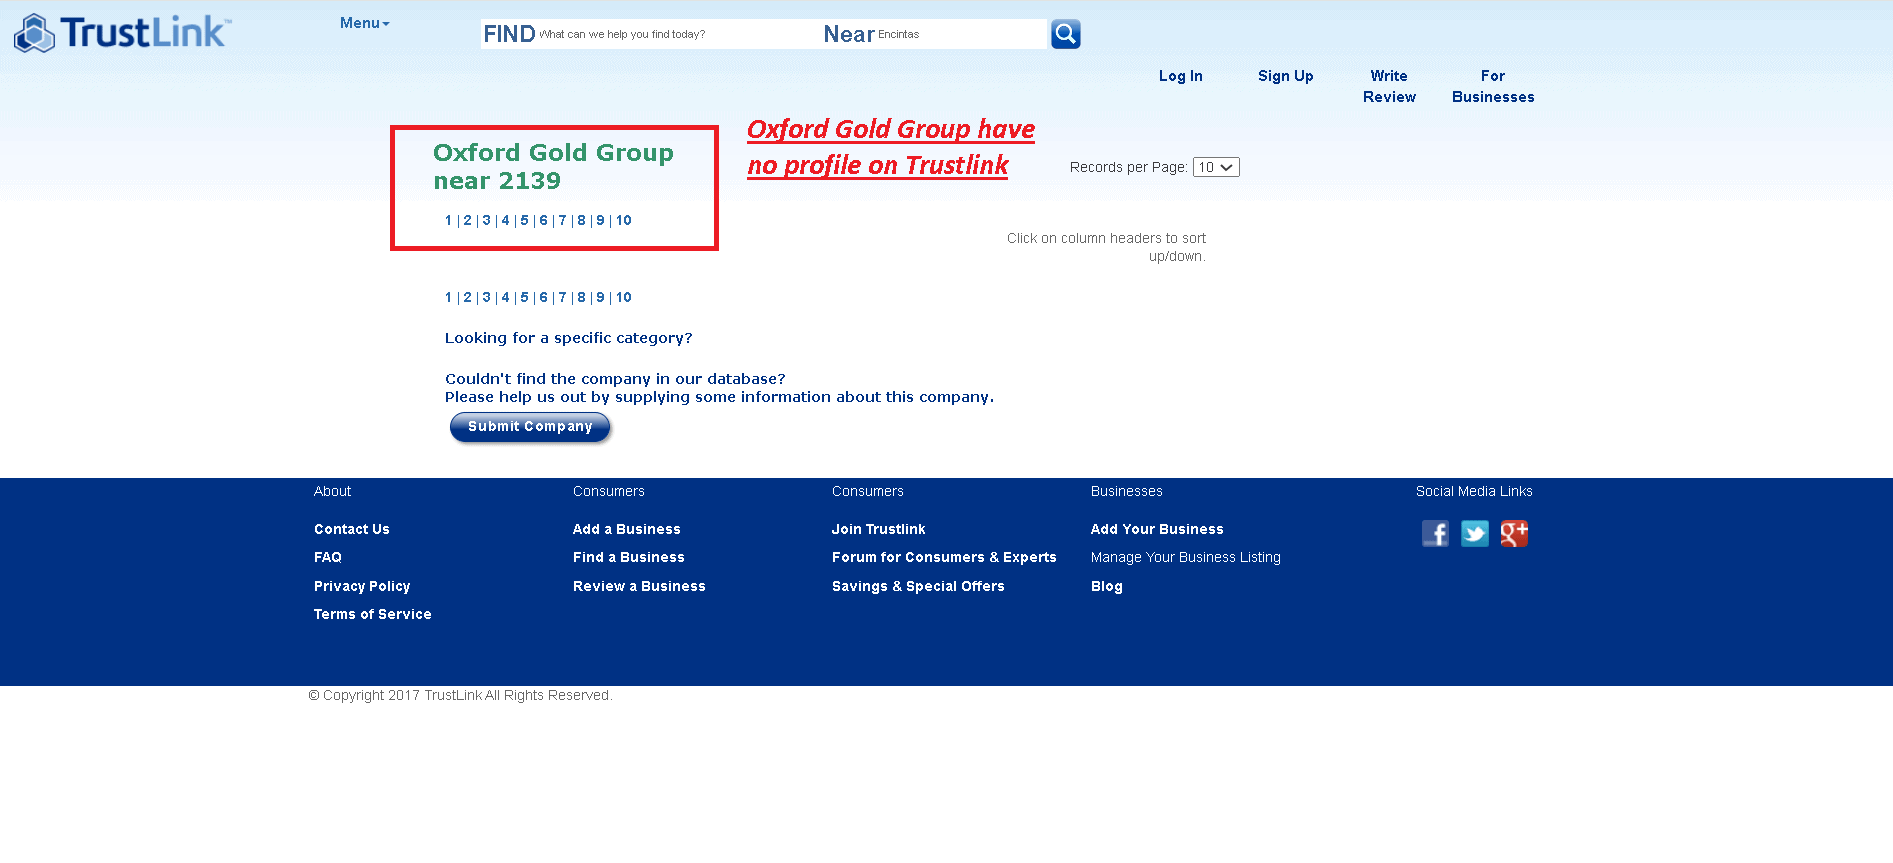 Oxford Gold Group have no profile and customer reviews on Trustlink